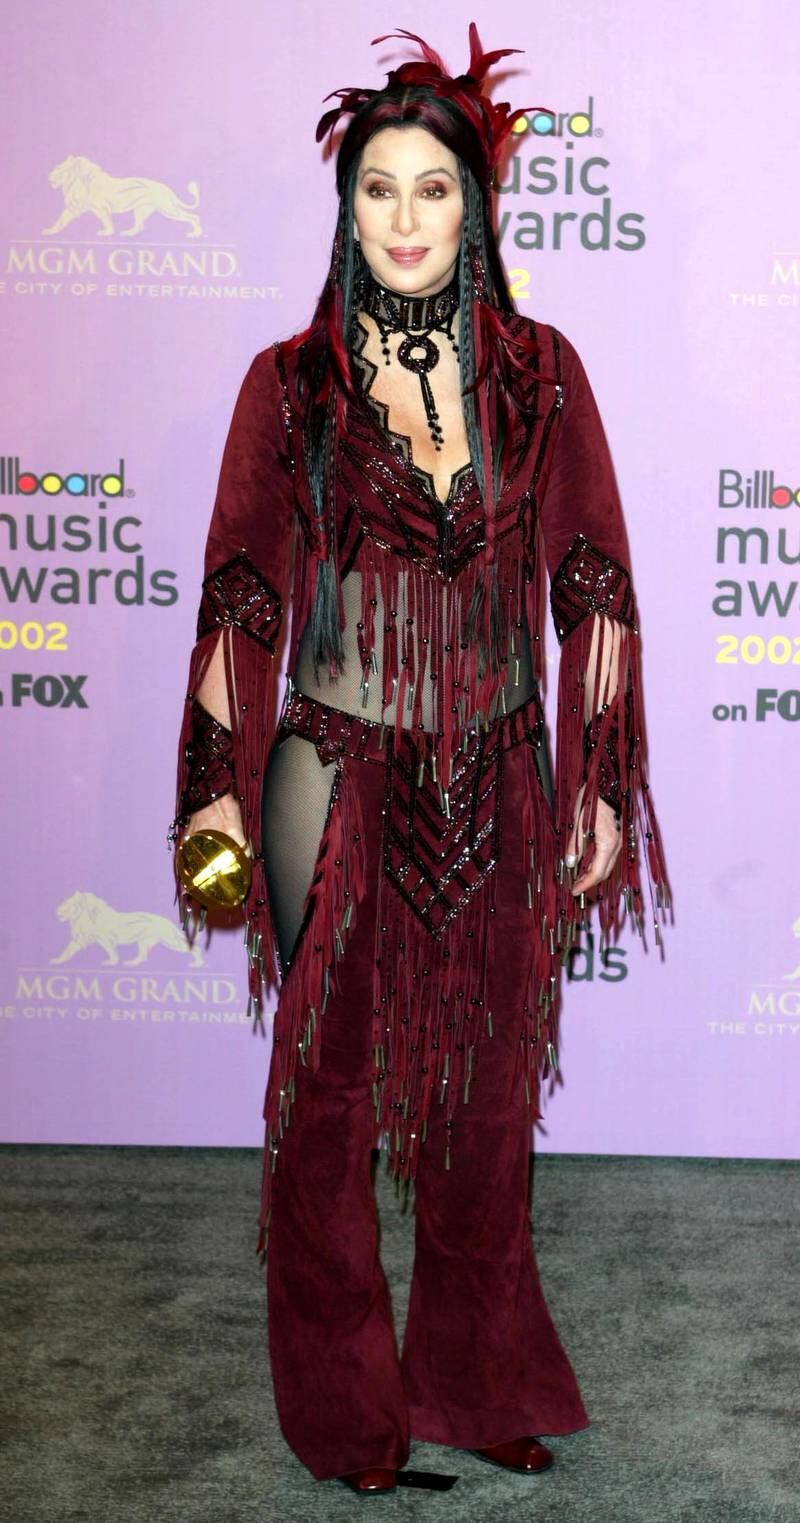 Singer Cher poses for photographers with her 'Artist Achievement Award' during  the Billboard Music Awards at the MGM Grand Hotel in Las Vegas.  *   The awards, in it's 14th year, recognises the artists and the songs that have climbed to the top of the American charts throughout the year.   (Photo by Anthony Harvey - PA Images/PA Images via Getty Images)